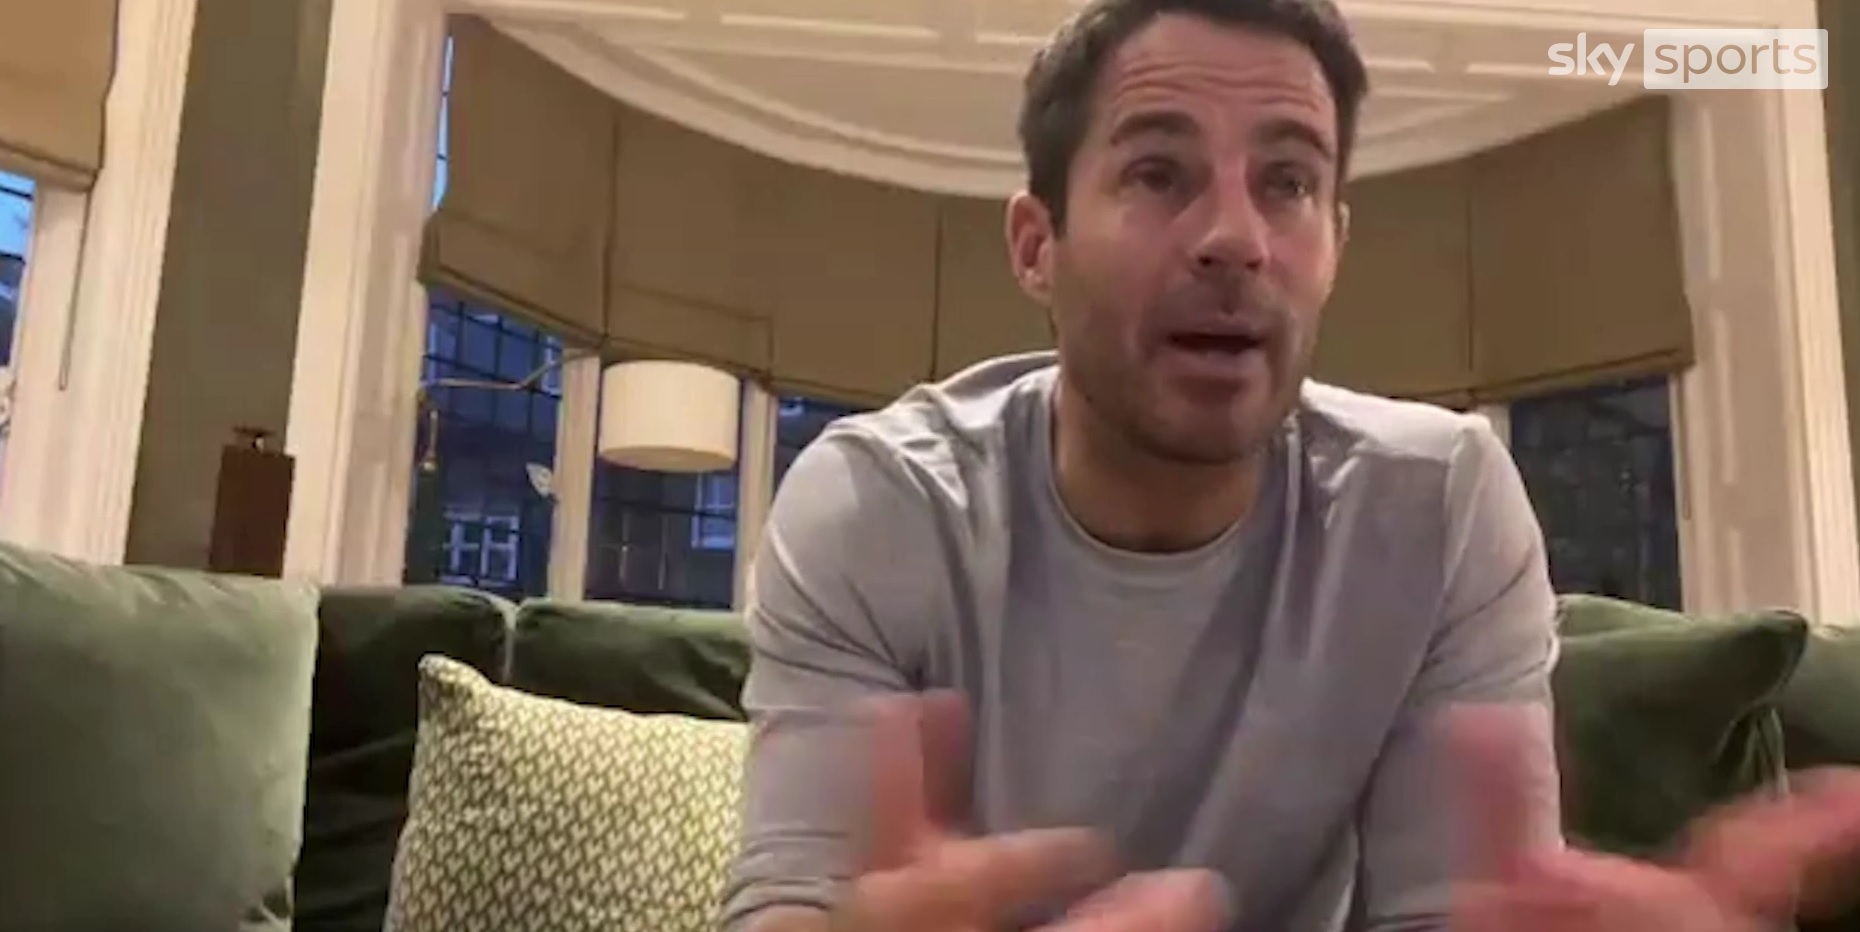 Jamie Redknapp hails ‘exceptional’ World Cup star everyone will ‘fall in love with’ amid Liverpool links